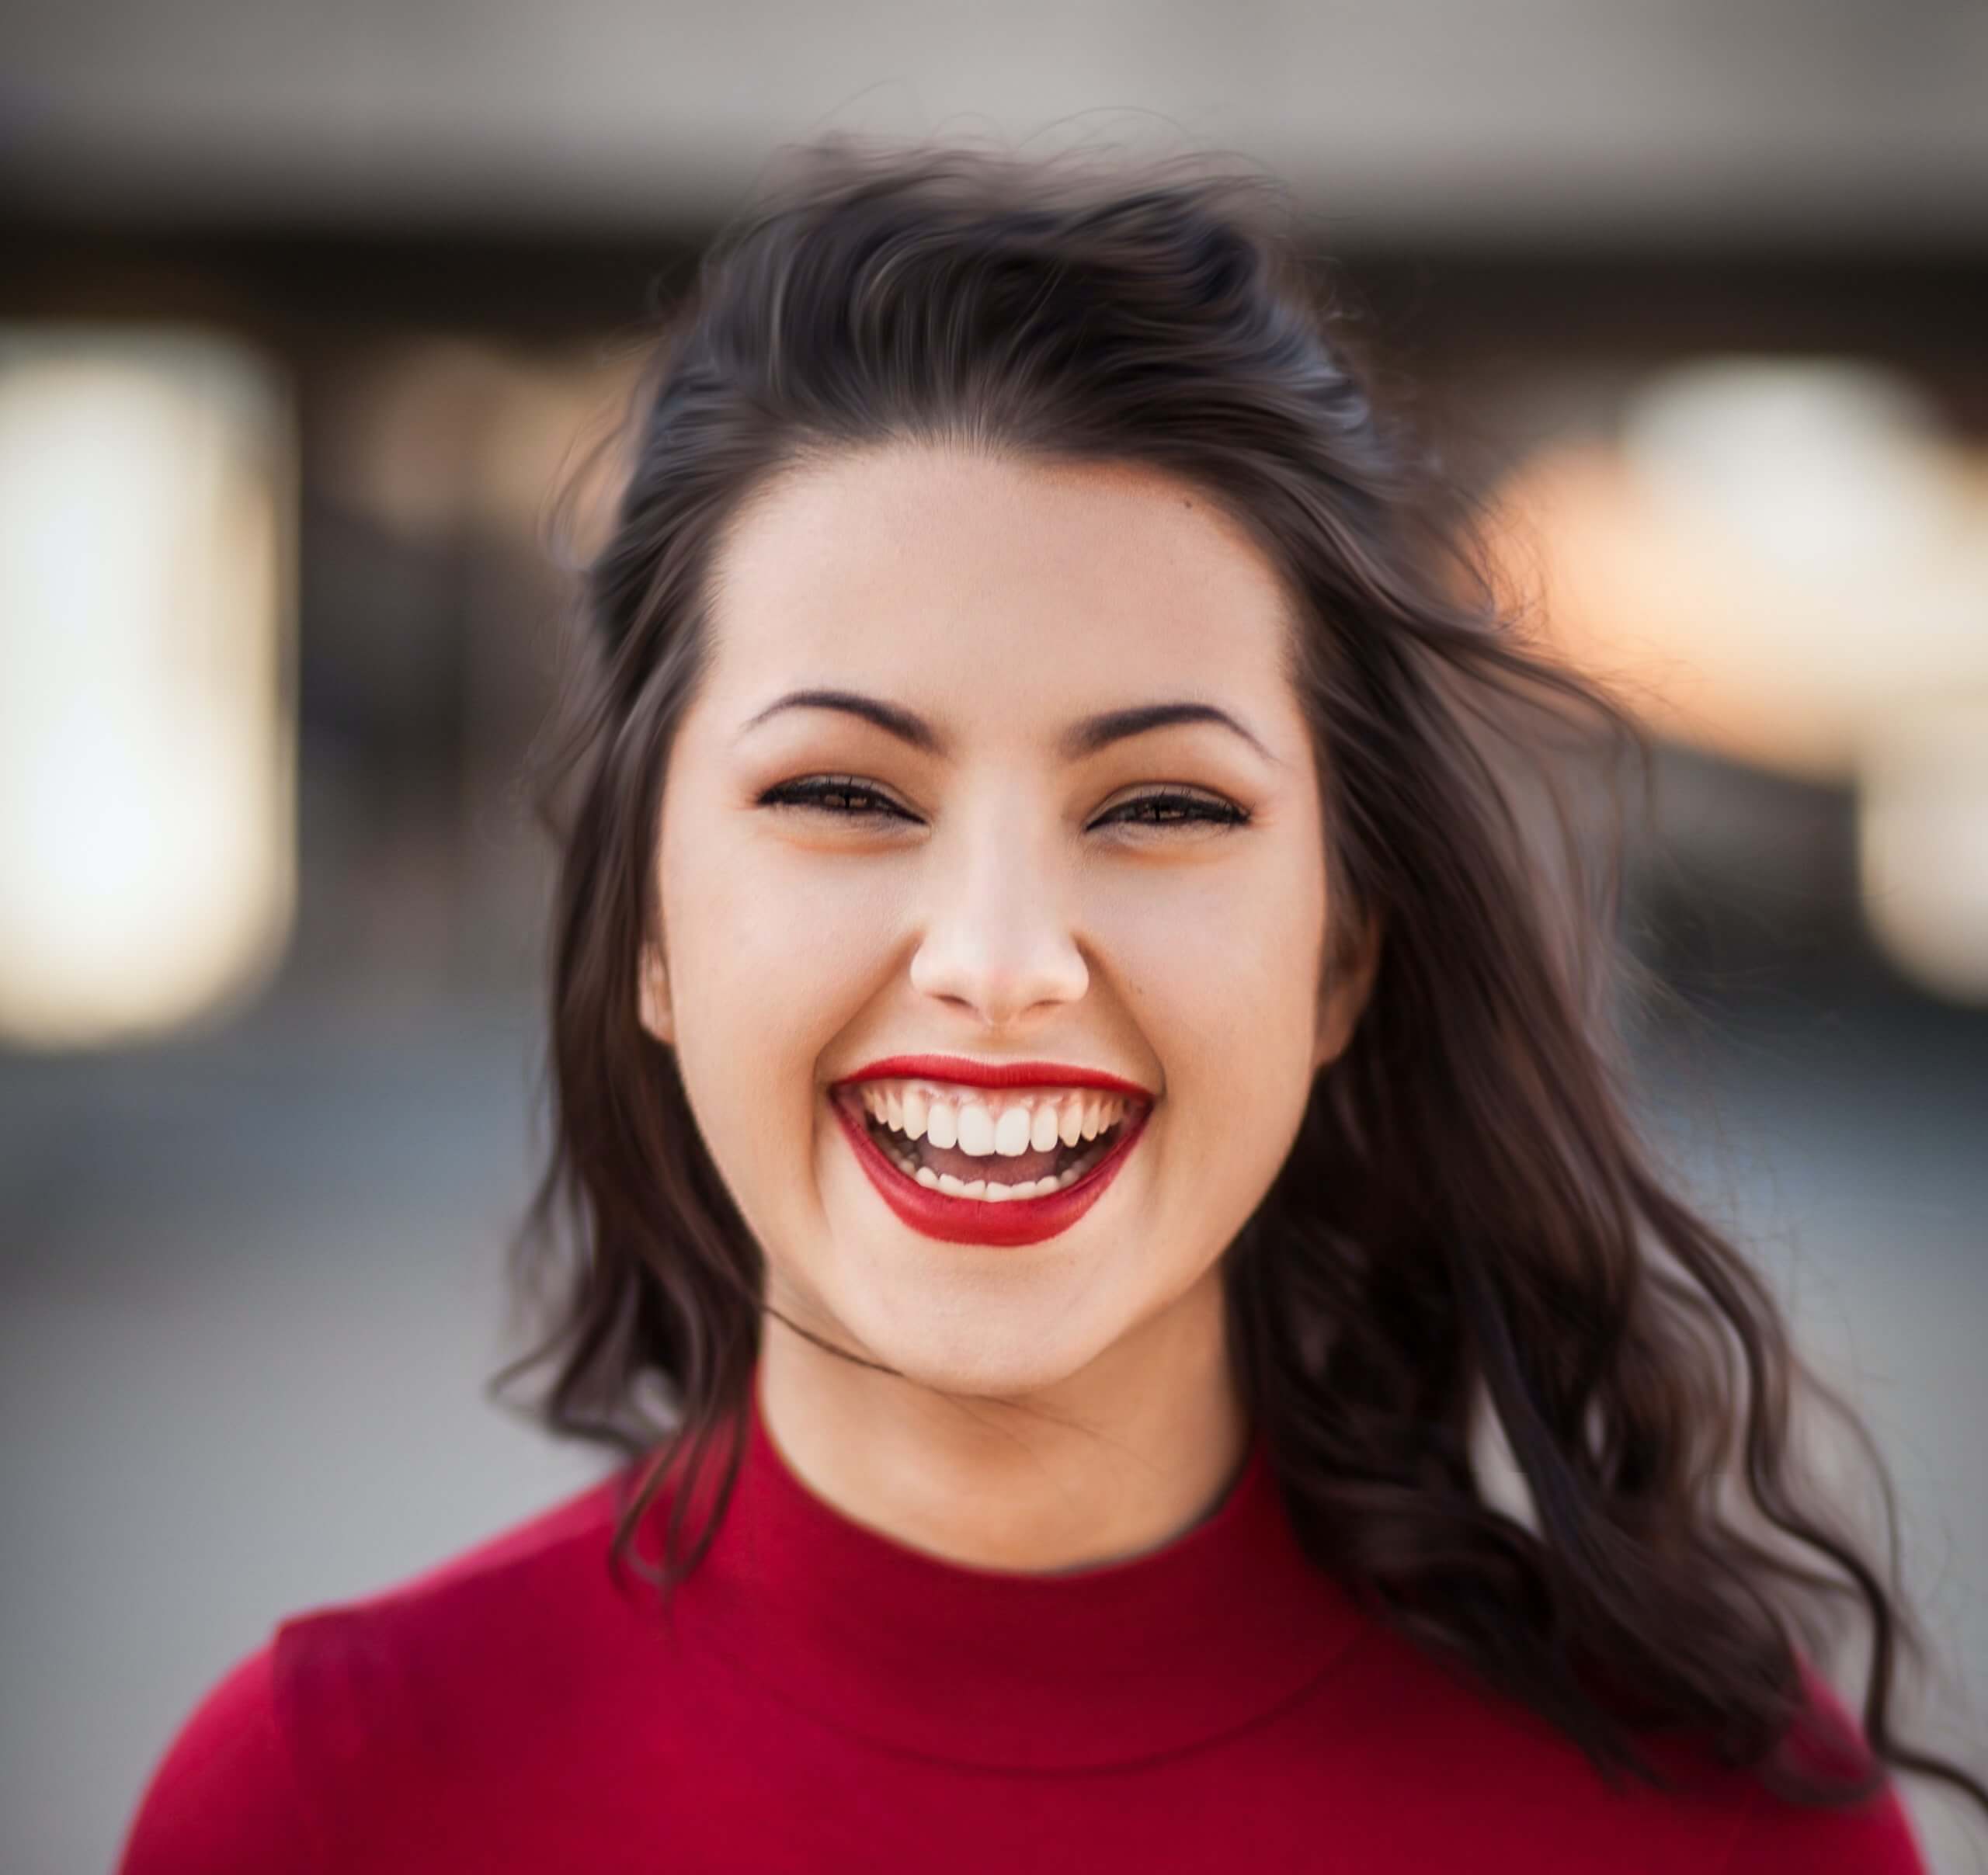 Image of a young woman happy with her new smile